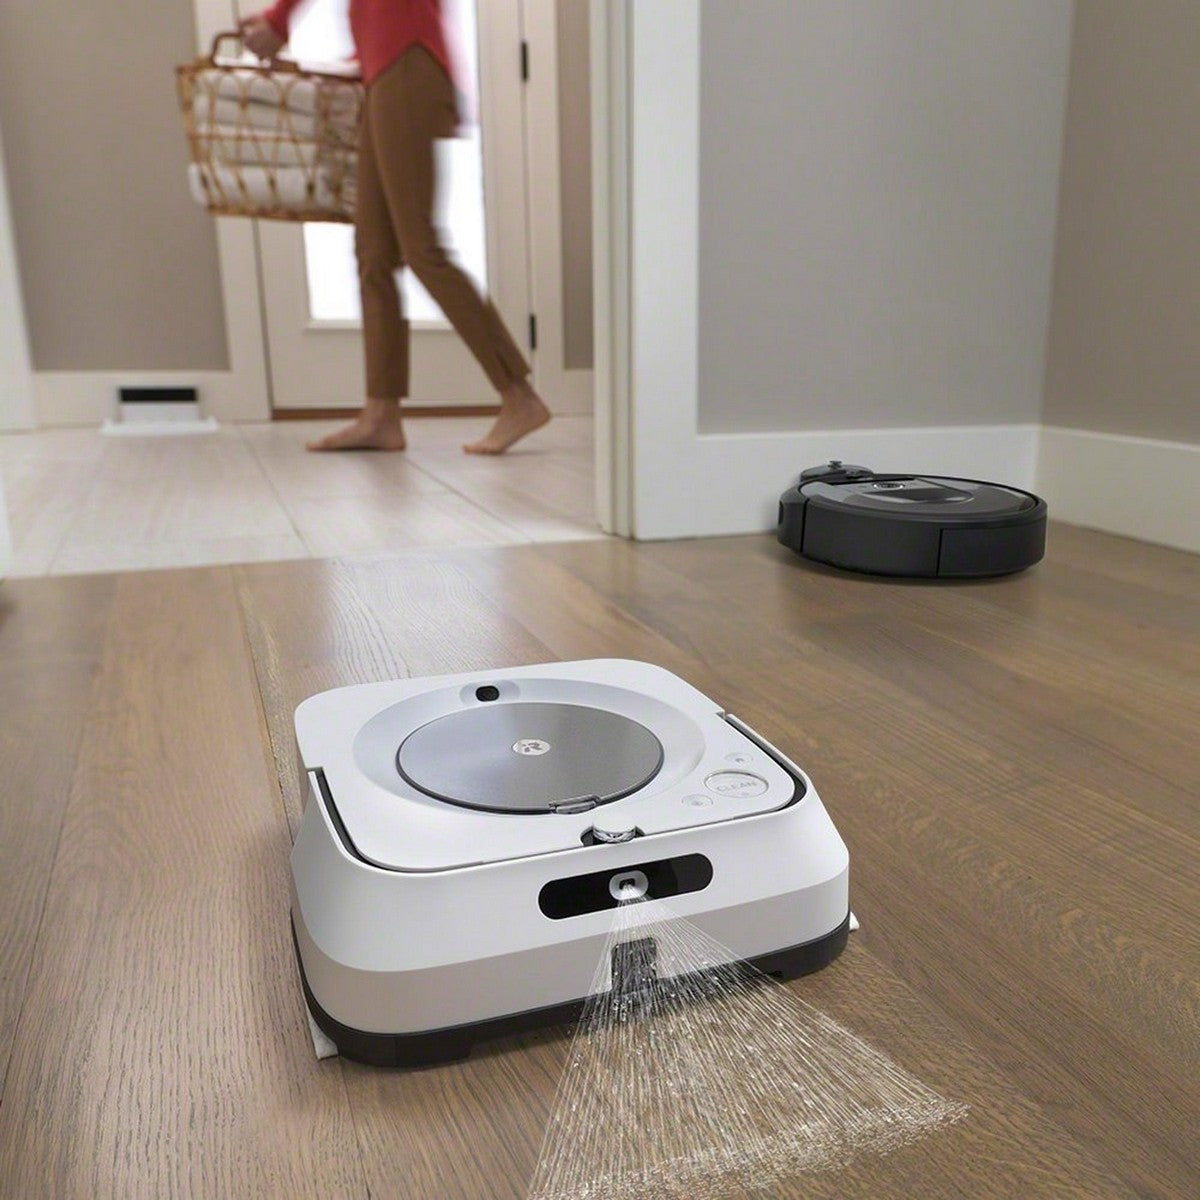 iRobot-Roomba-i7-Wi-Fi-Connected-Robot-Vacuum-Cleaner-listing-function